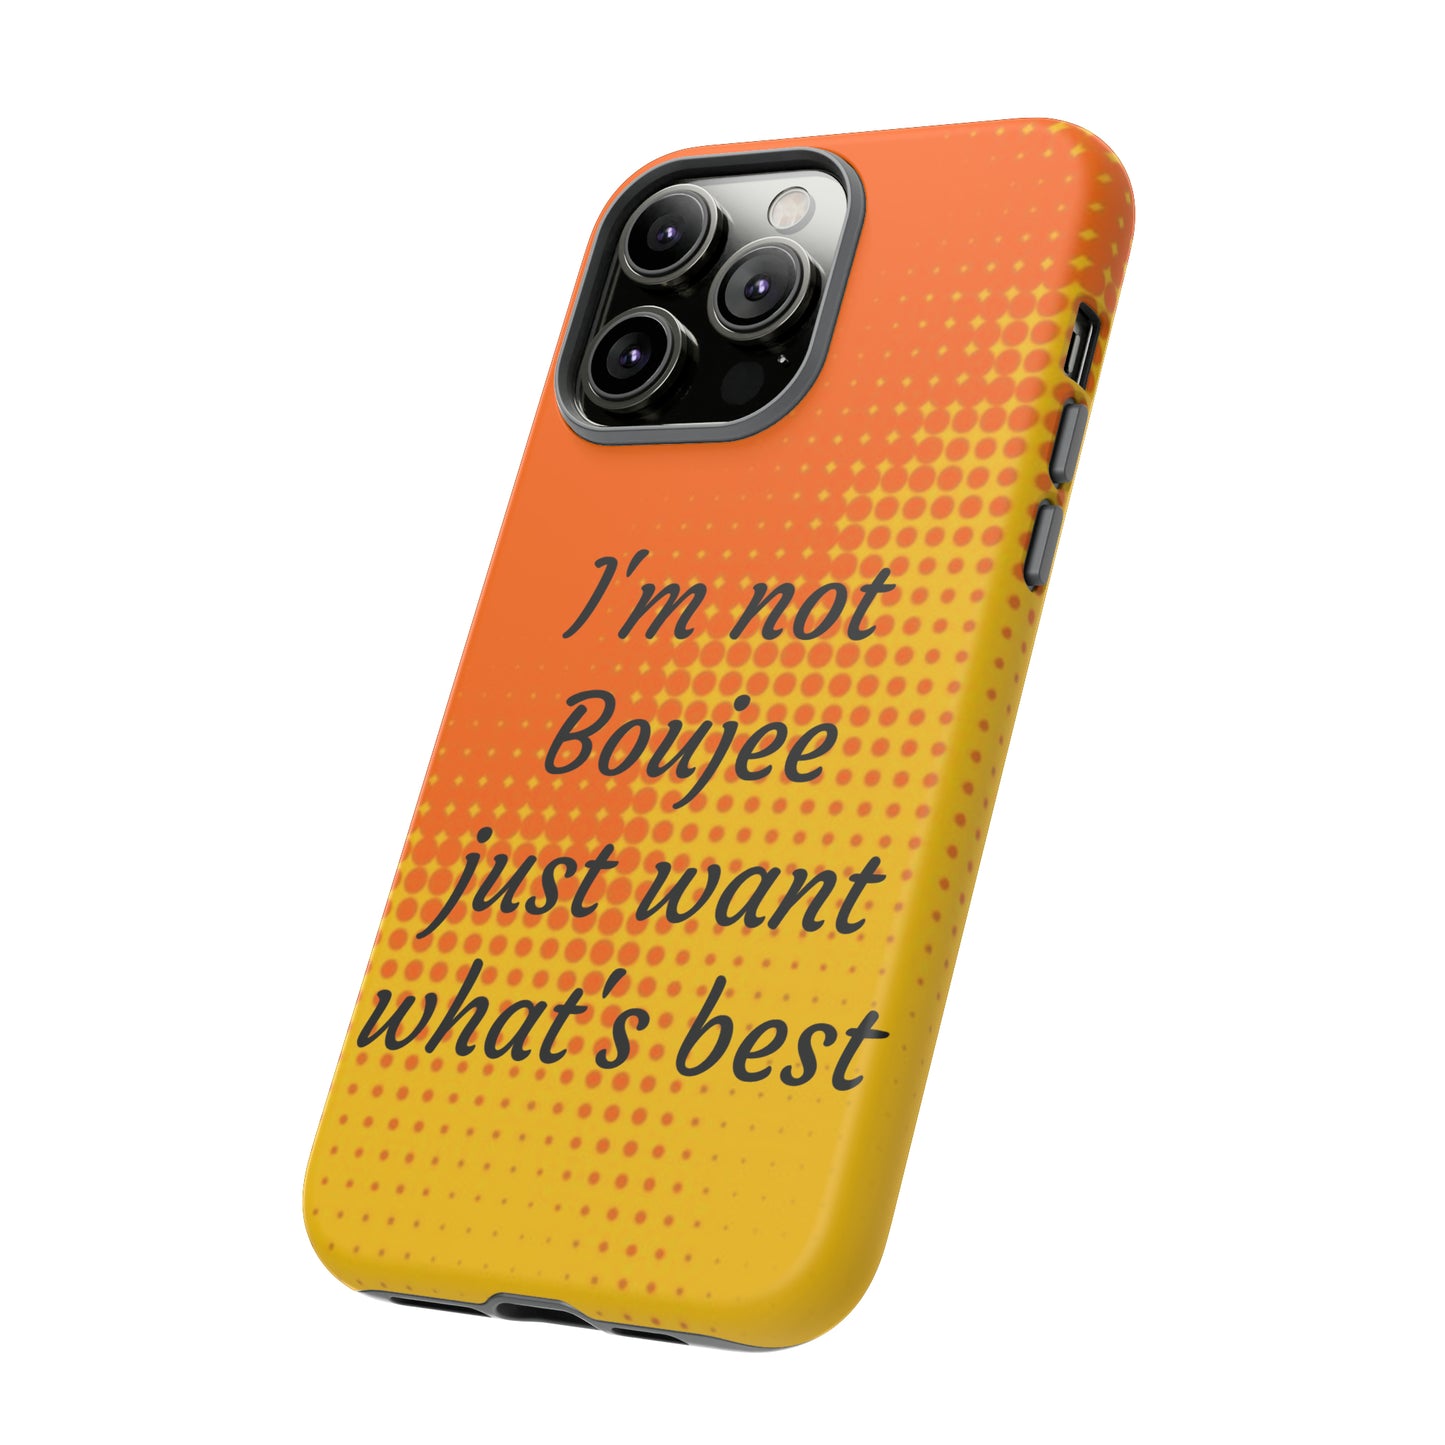 "I'm not boujee just want what's best" Tough Phone Cases